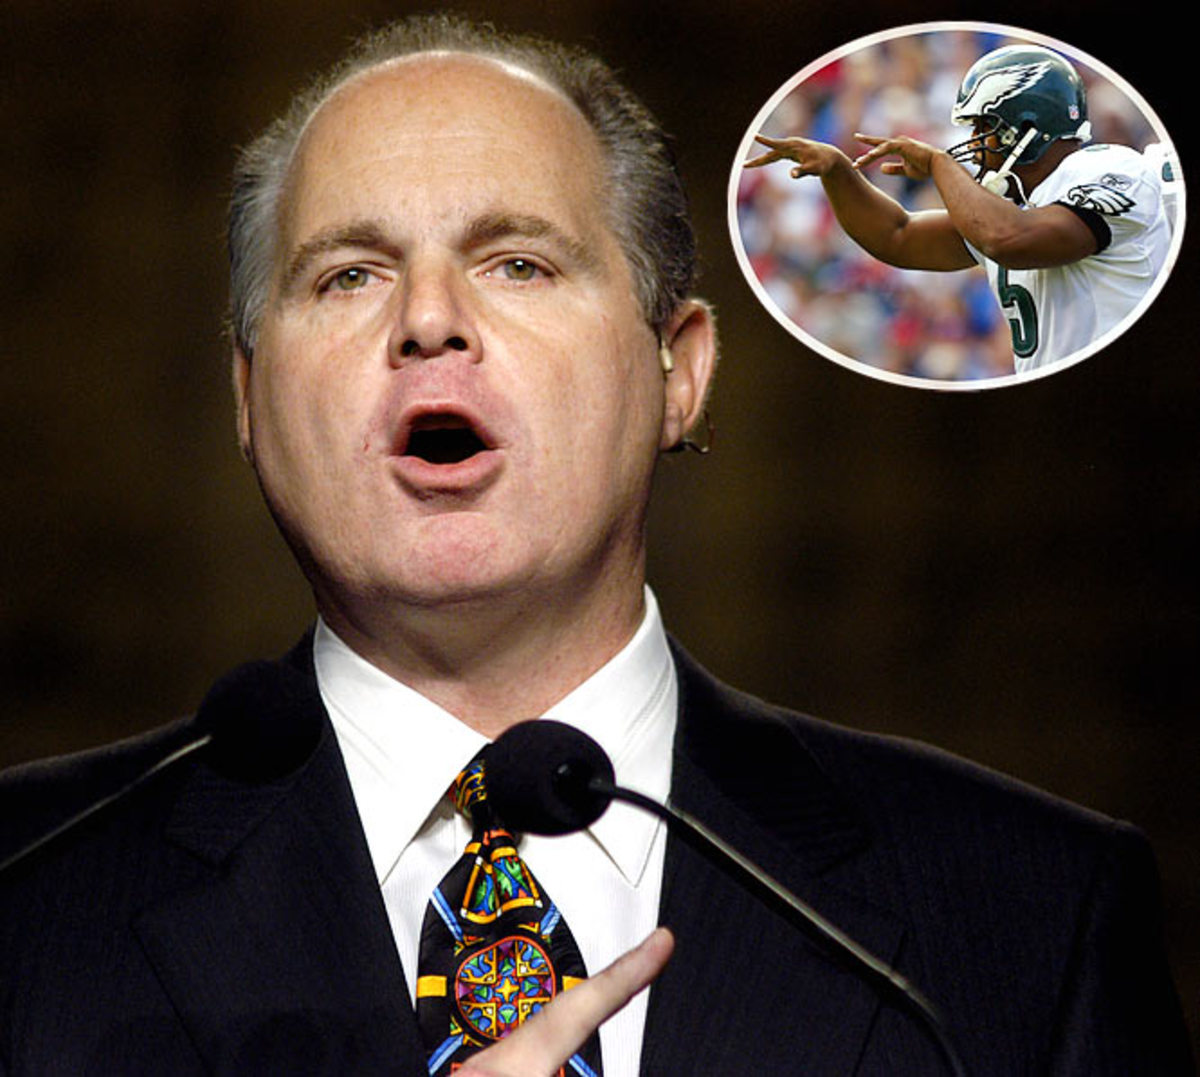 Rush Limbaugh's comments about Donovan McNabb